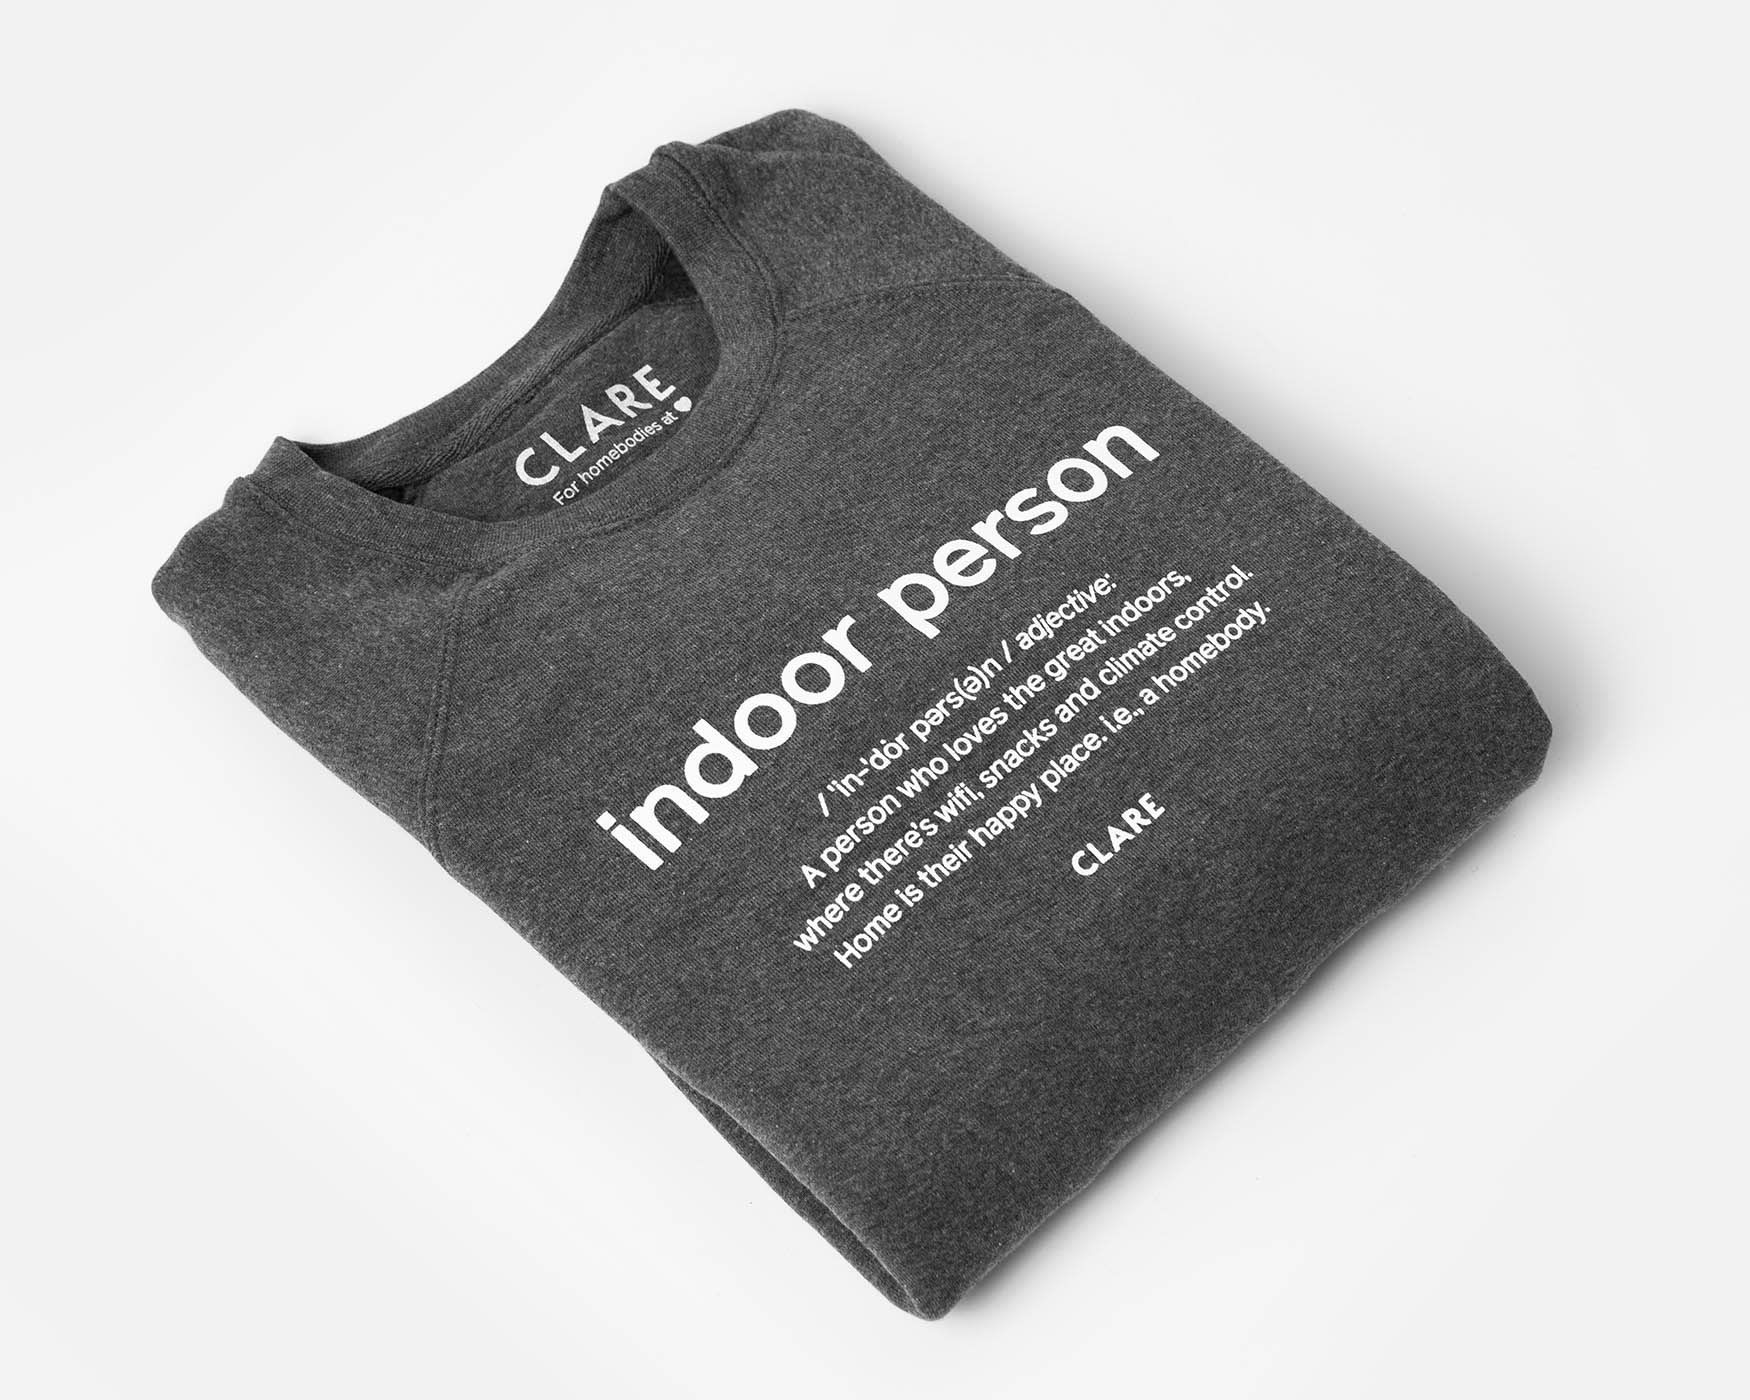 Your loungewear collection just got cuter: Clare's new Indoor Person crewneck sweatshirt is here! Learn more and shop the new launch now!